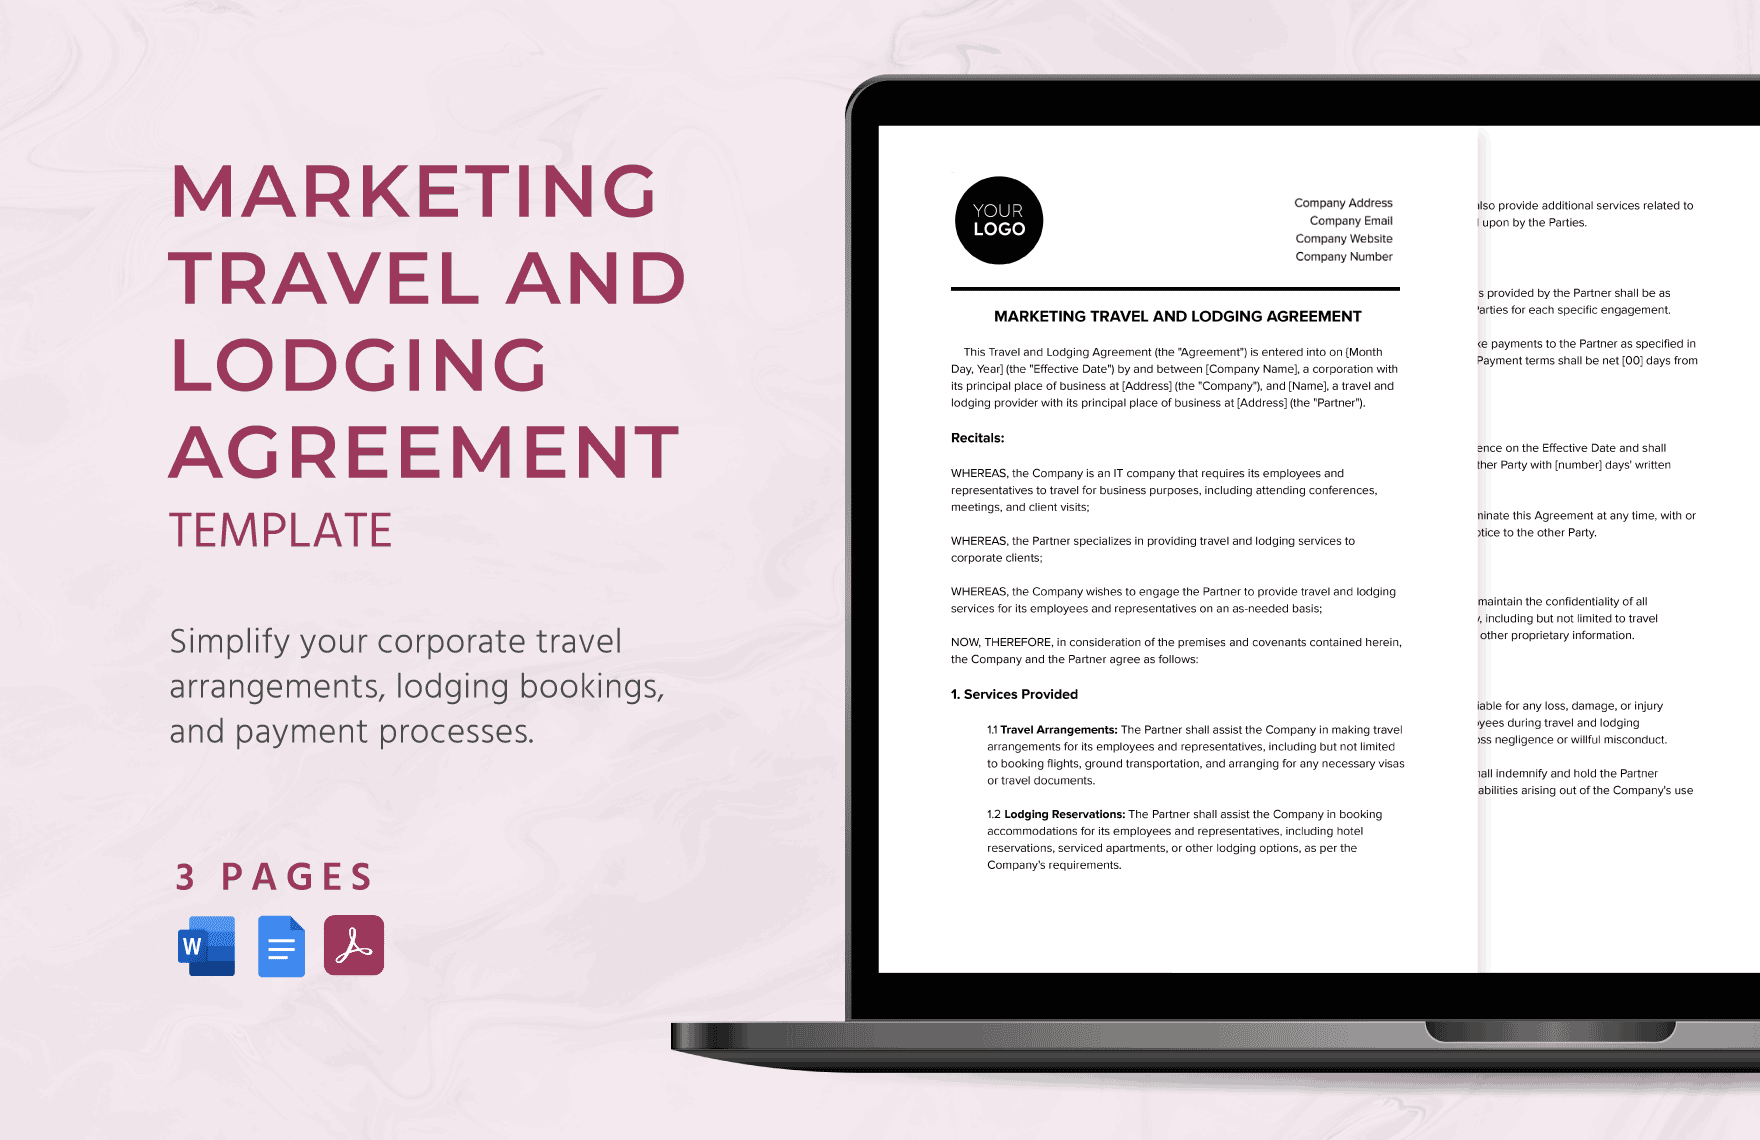 Marketing Travel and Lodging Agreement Template